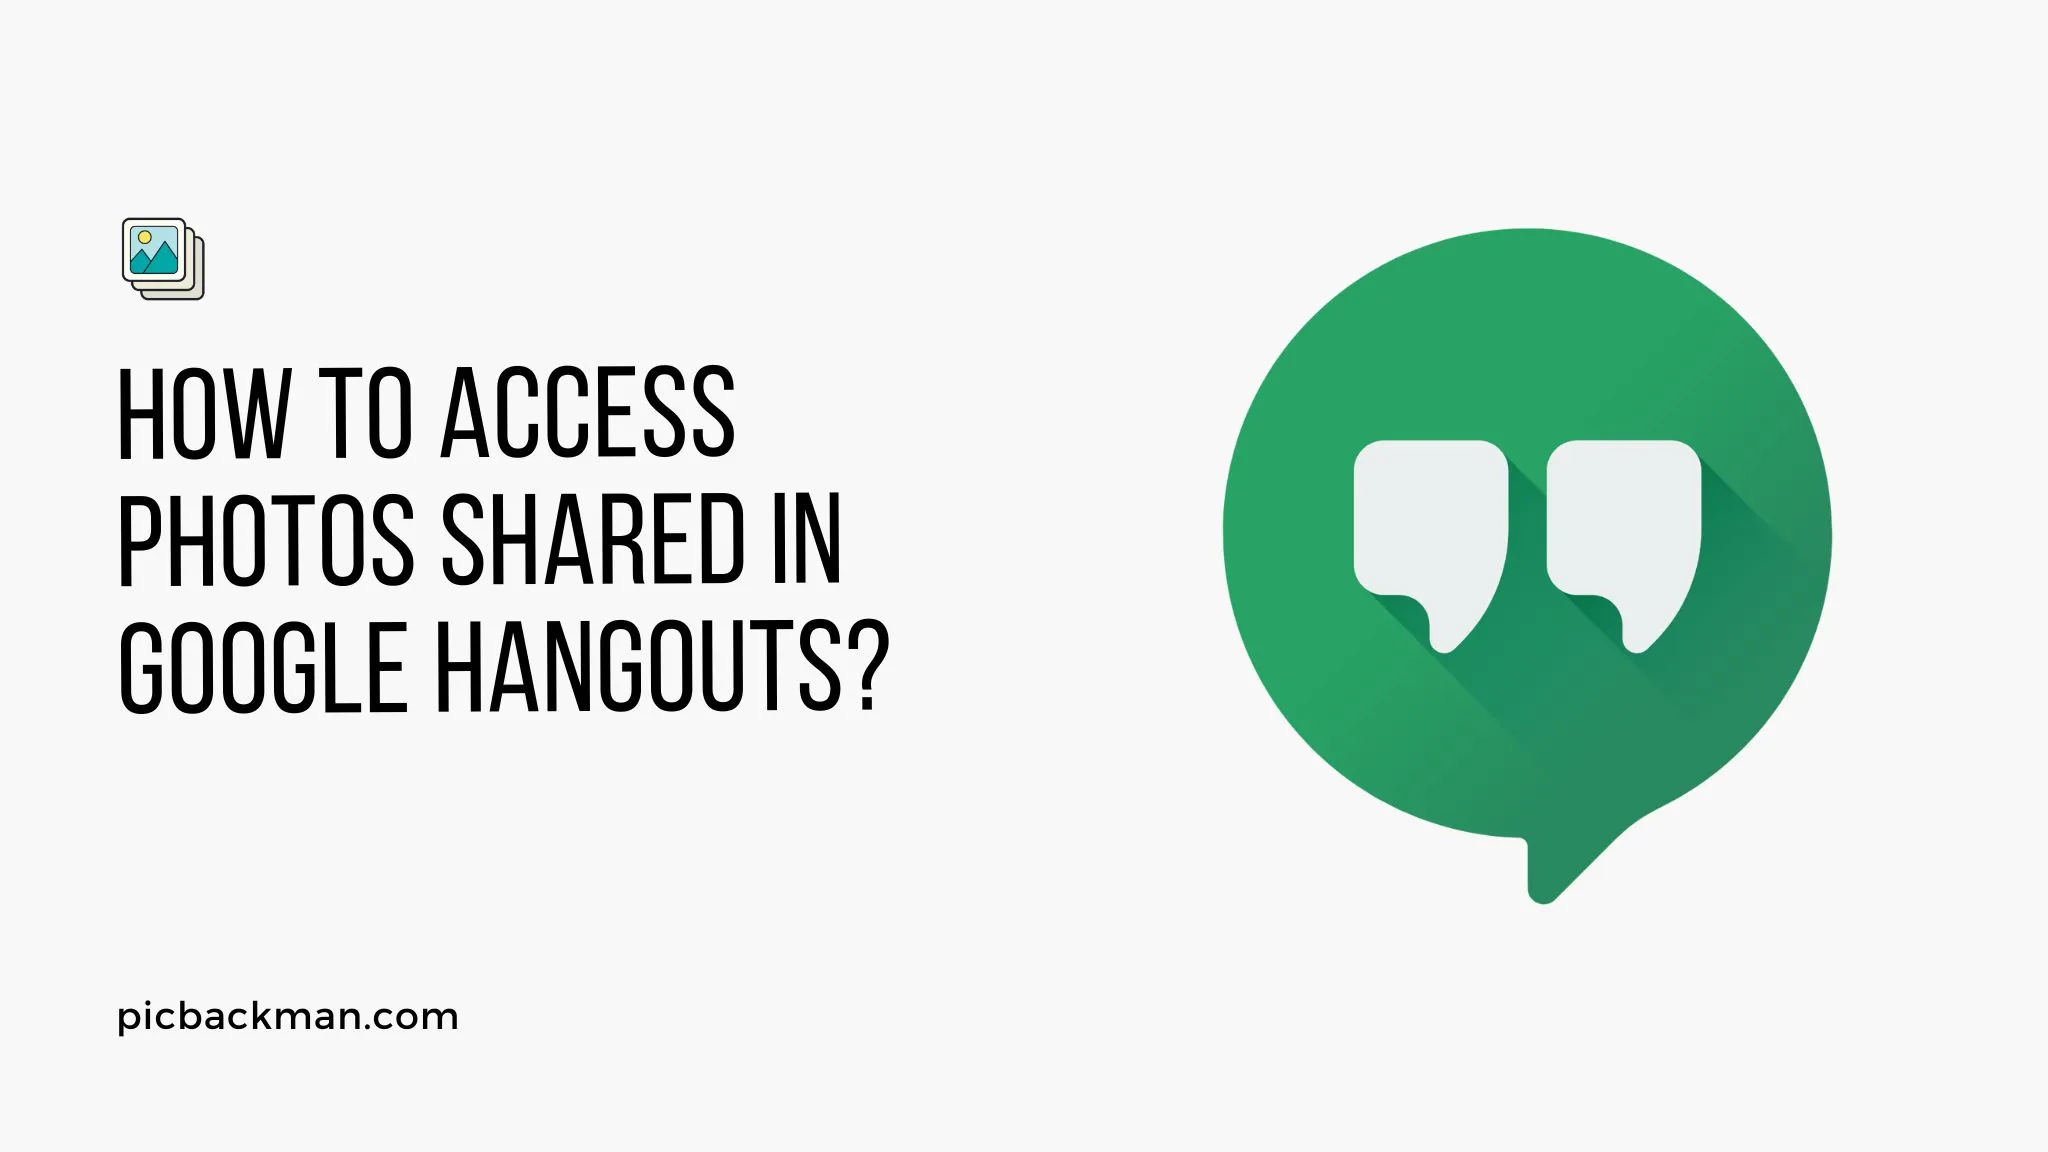 How to Access Photos Shared in Google Hangouts